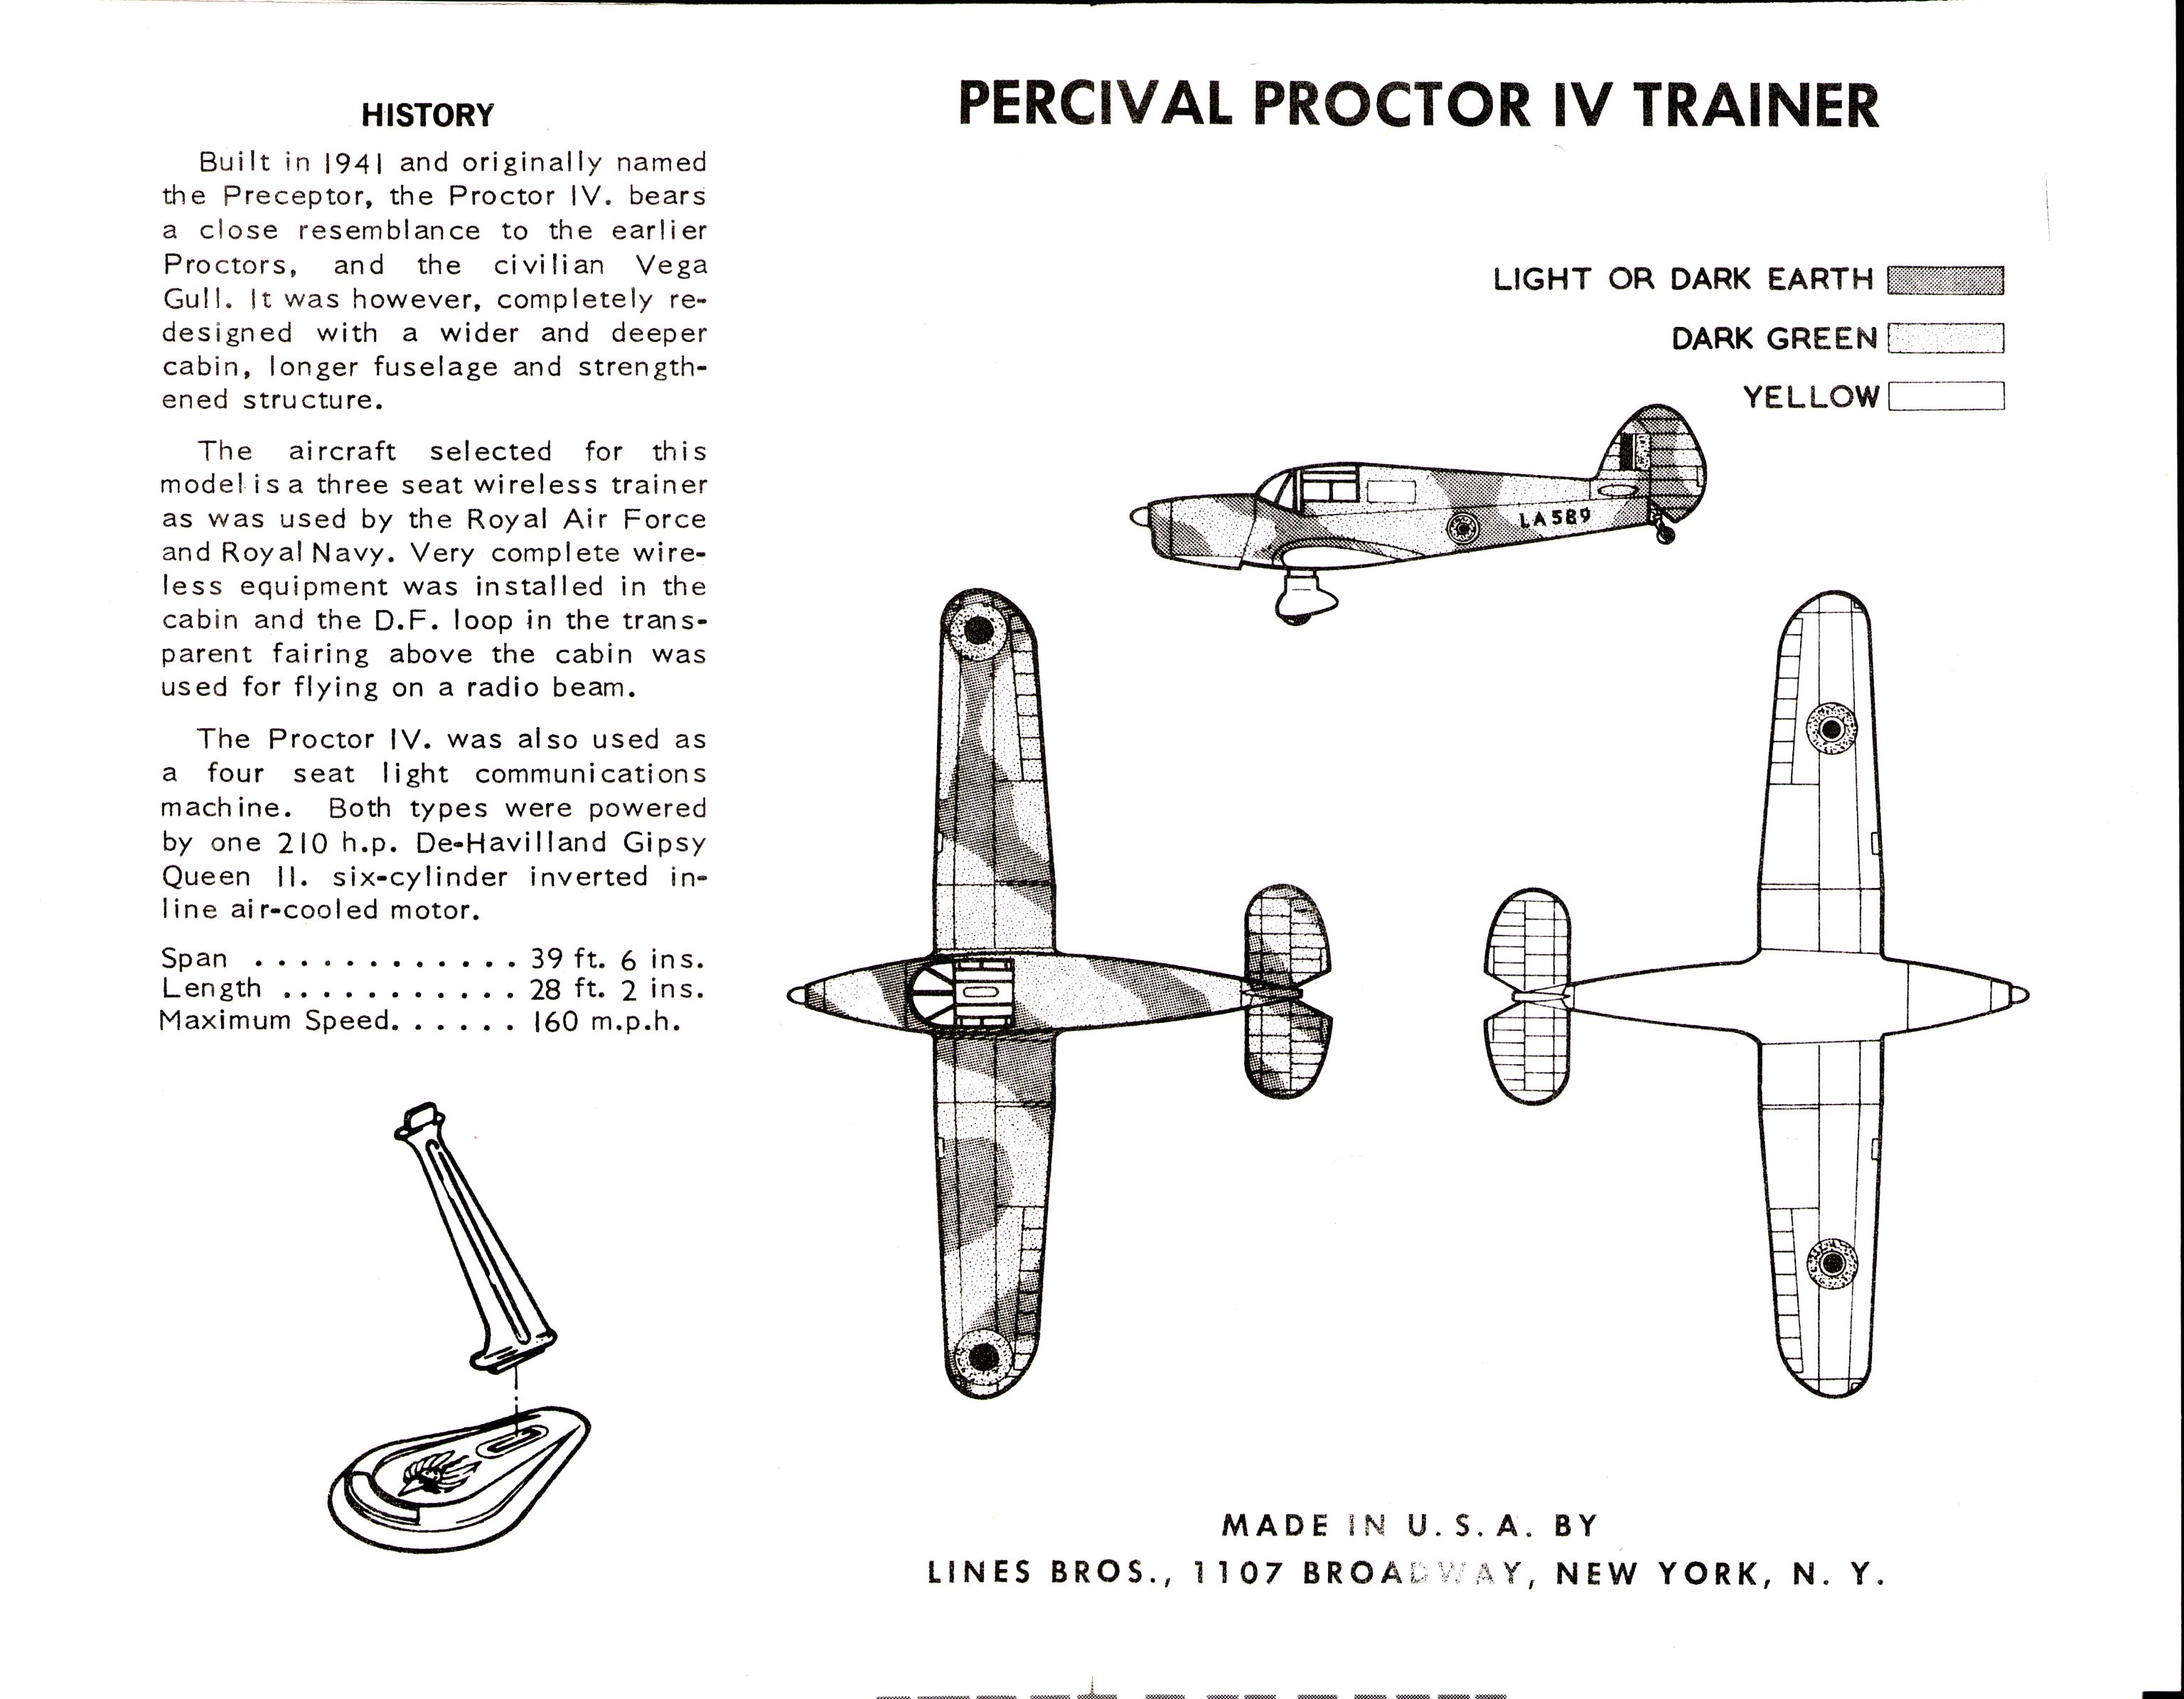 Air Lines 4905 Percival Proctor IV, Lines Bros. Inc., 1964, painting guide